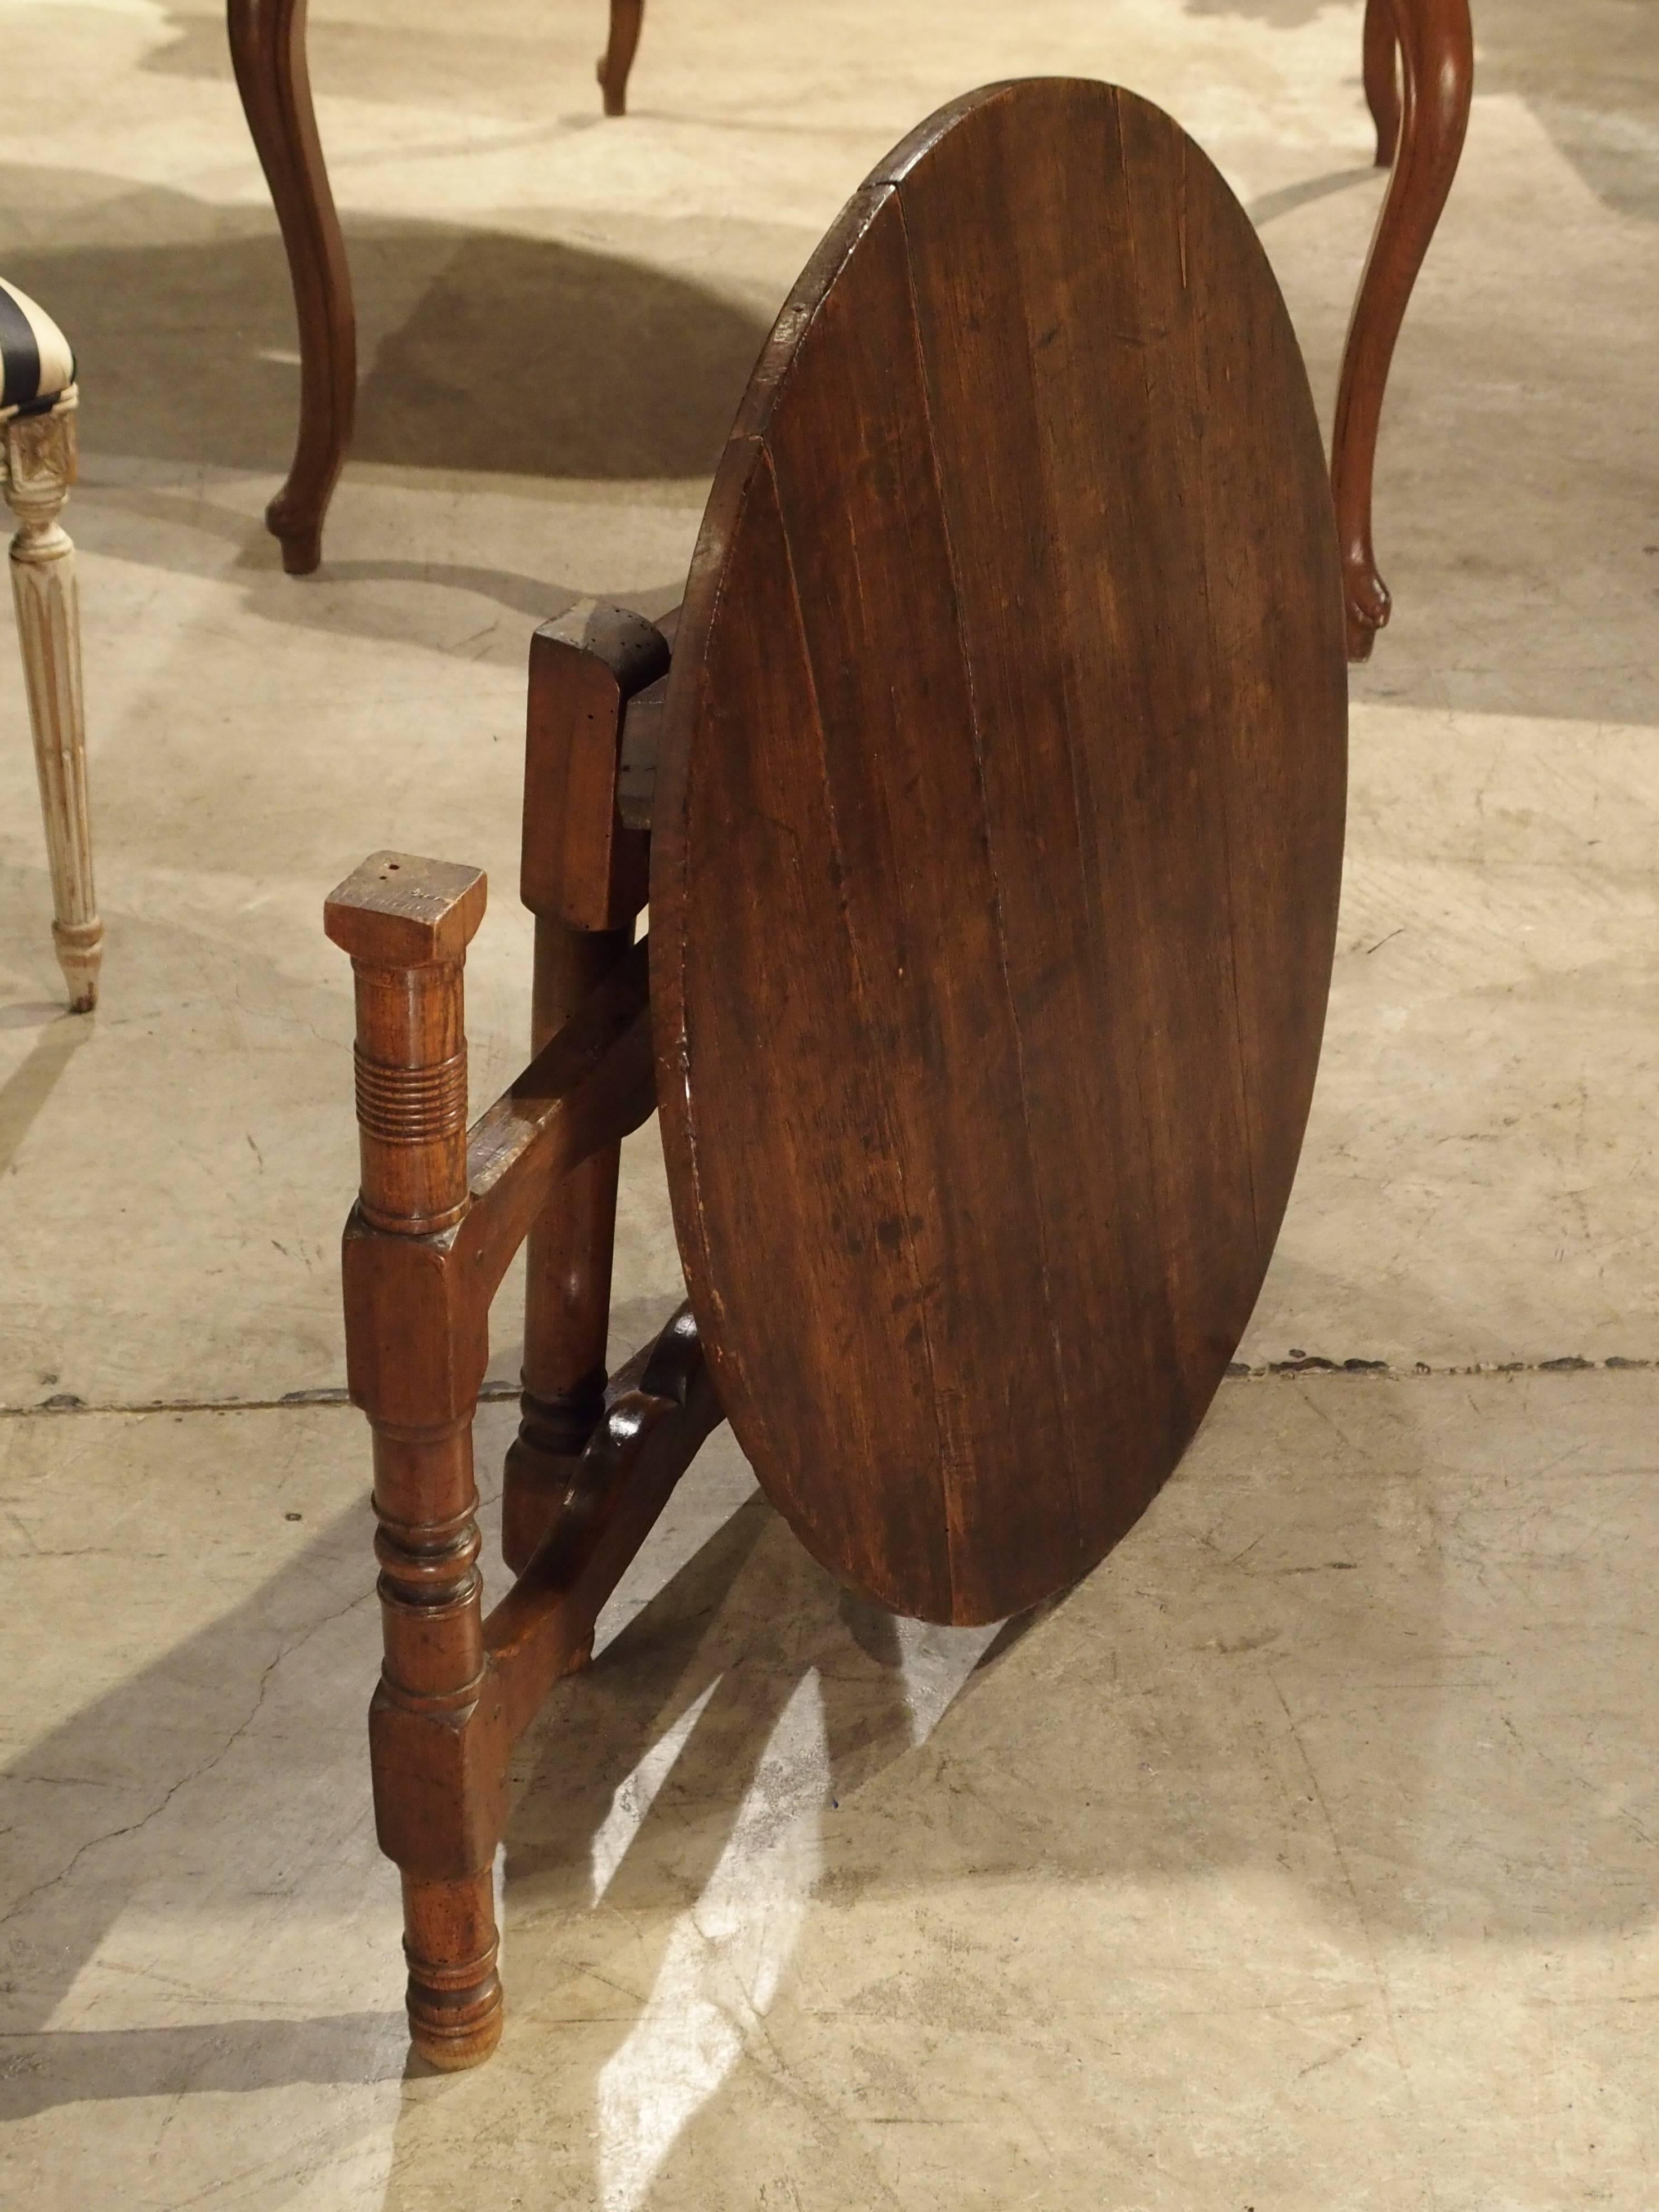 This versatile side or end table is also a tilt-top table from France. It has been constructed of prime French walnut wood, which was so valuable to Louis XV, that he would not allow it to be exported during his reign. The front leg moves to one